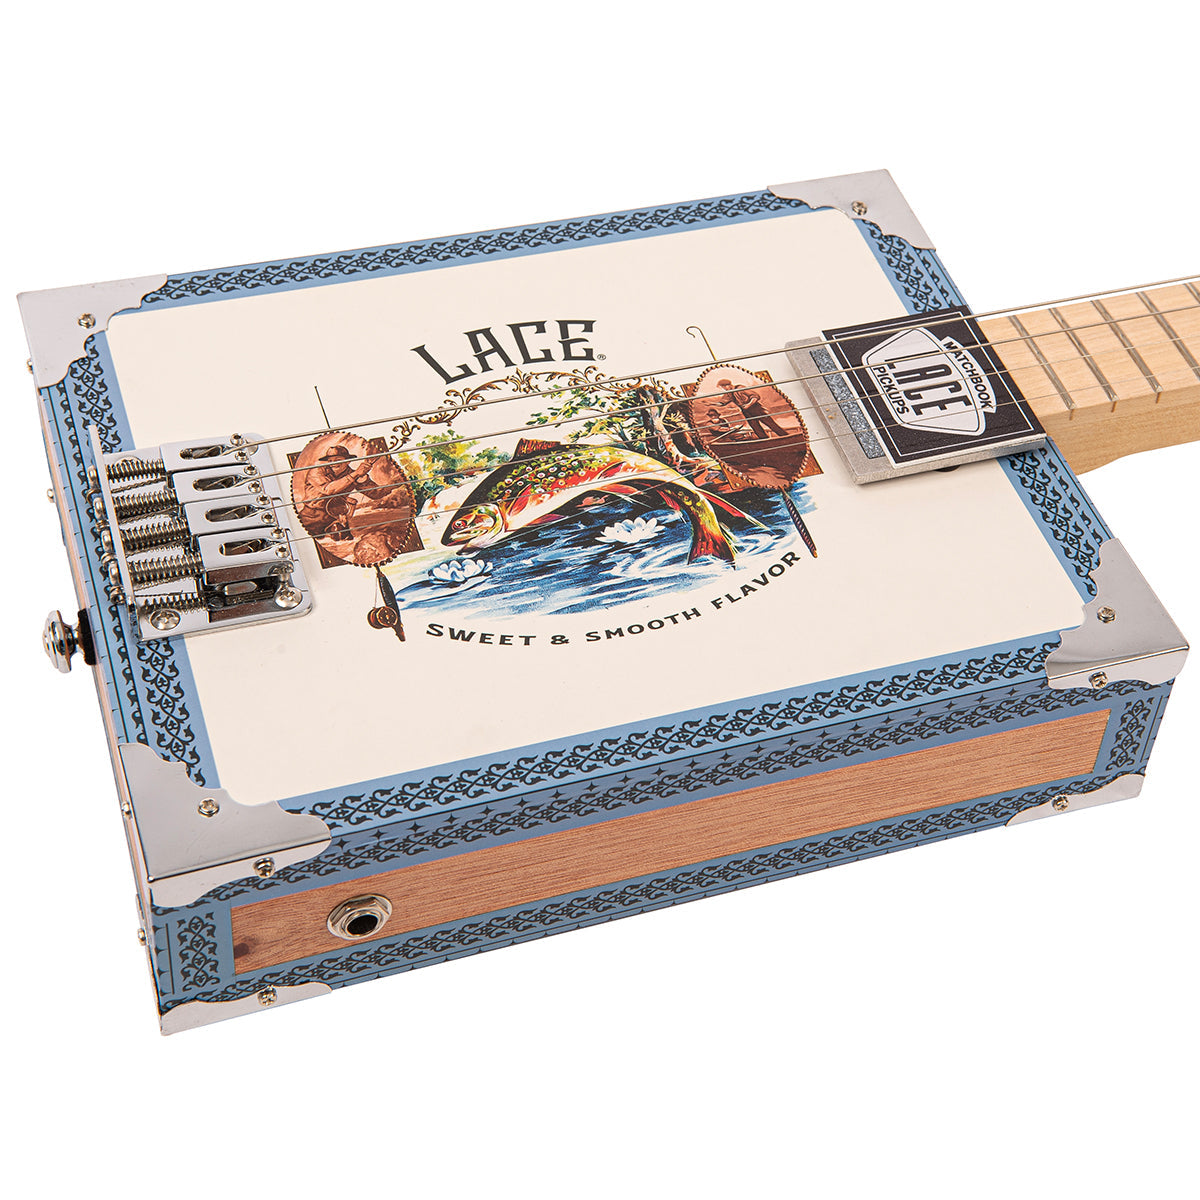 Lace Cigar Box Electric Guitar ~ 4 String ~ Gone Fishin', Electric Guitars for sale at Richards Guitars.